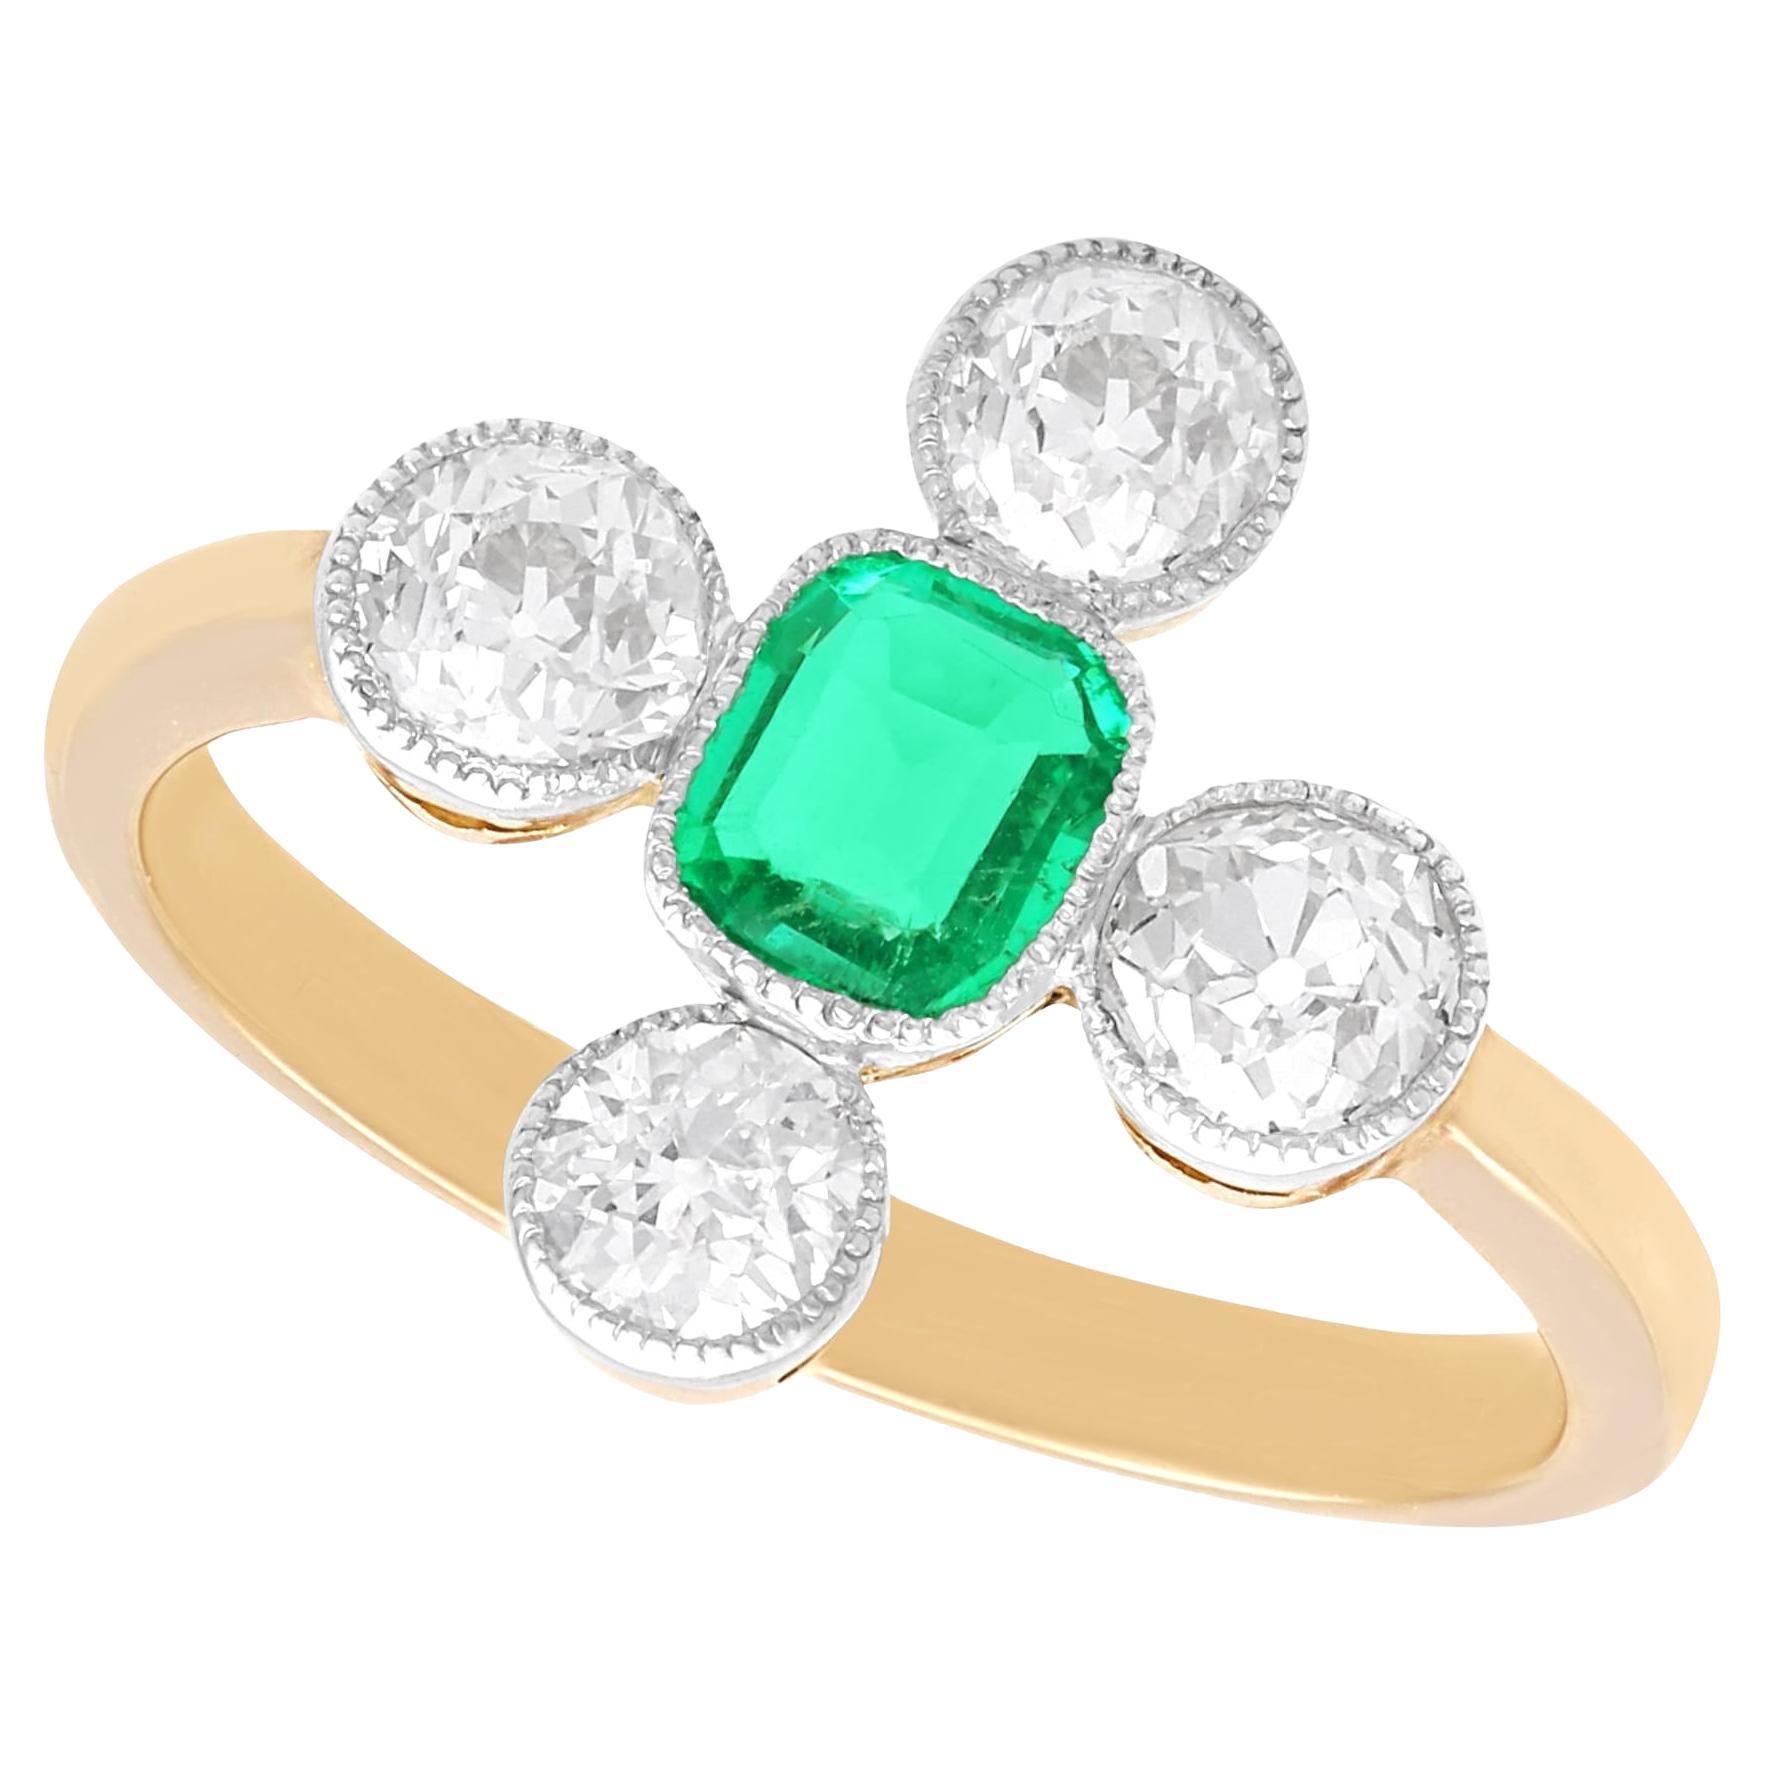 1920s 0.42 Carat Emerald and 1.20 Carat Diamond 12K Yellow Gold Dress Ring For Sale